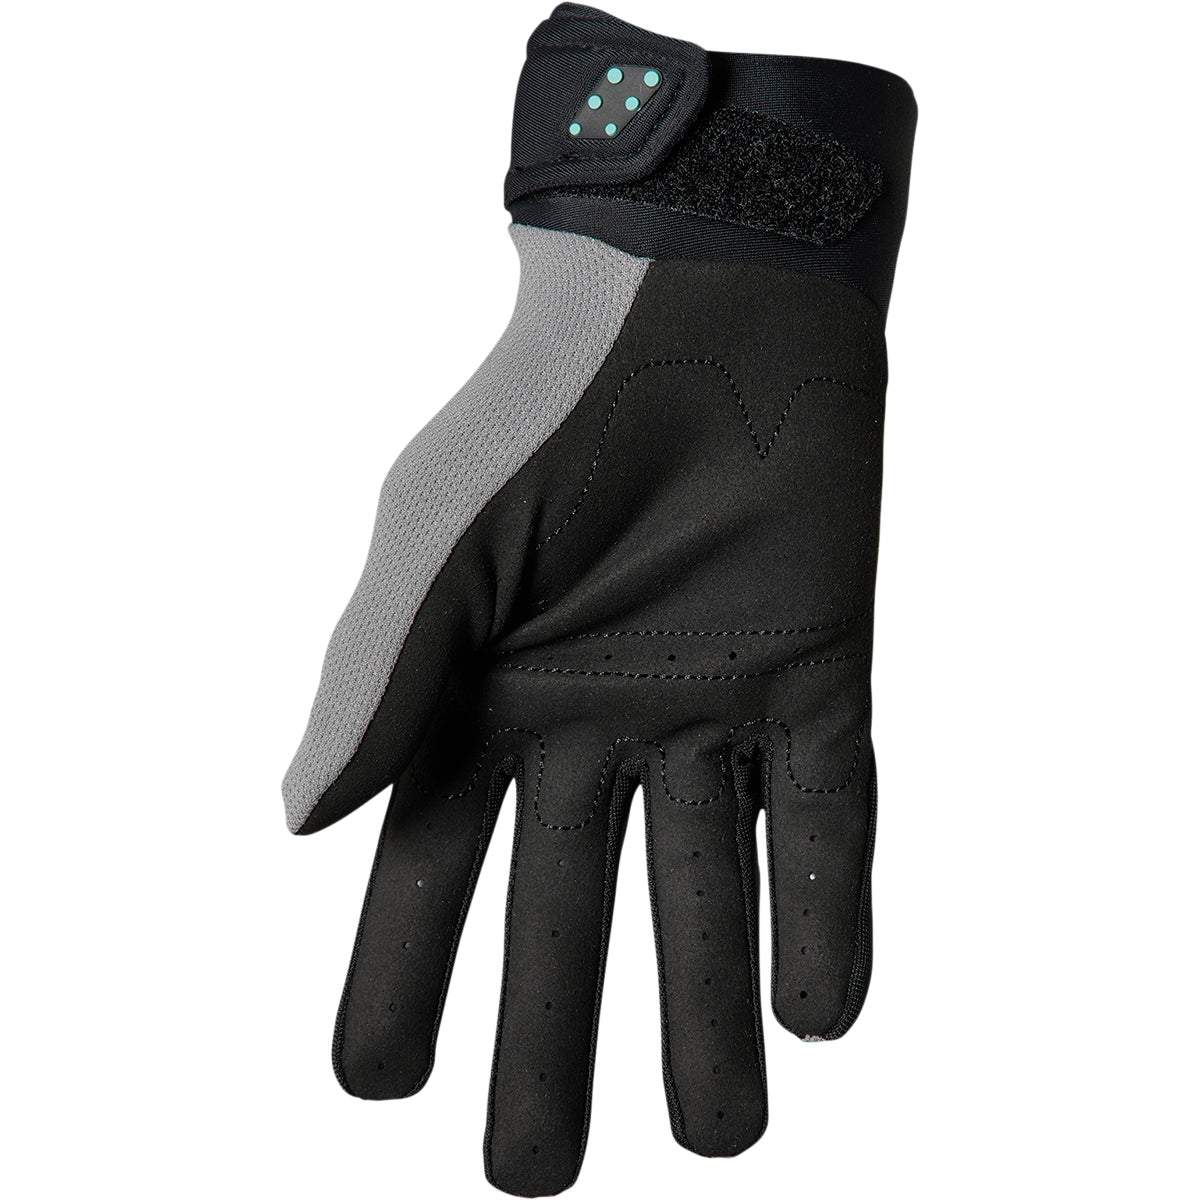 THOR Youth Spectrum Gloves